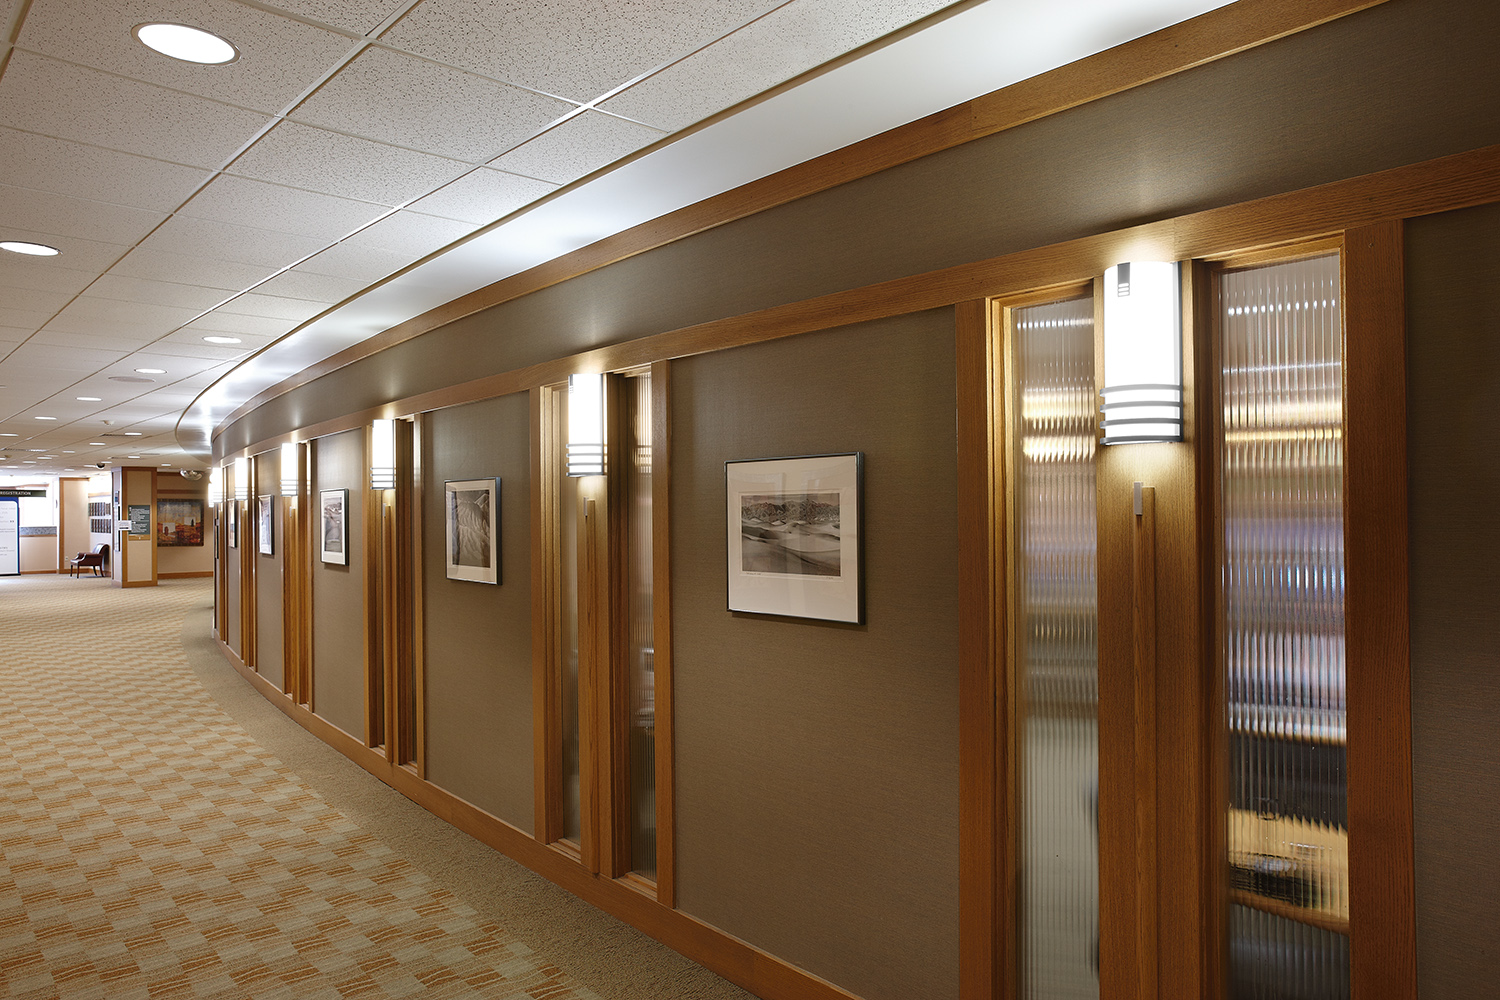 Colonnade wall sconces are classic office lighting fixtures, seen here along an interior hallway.